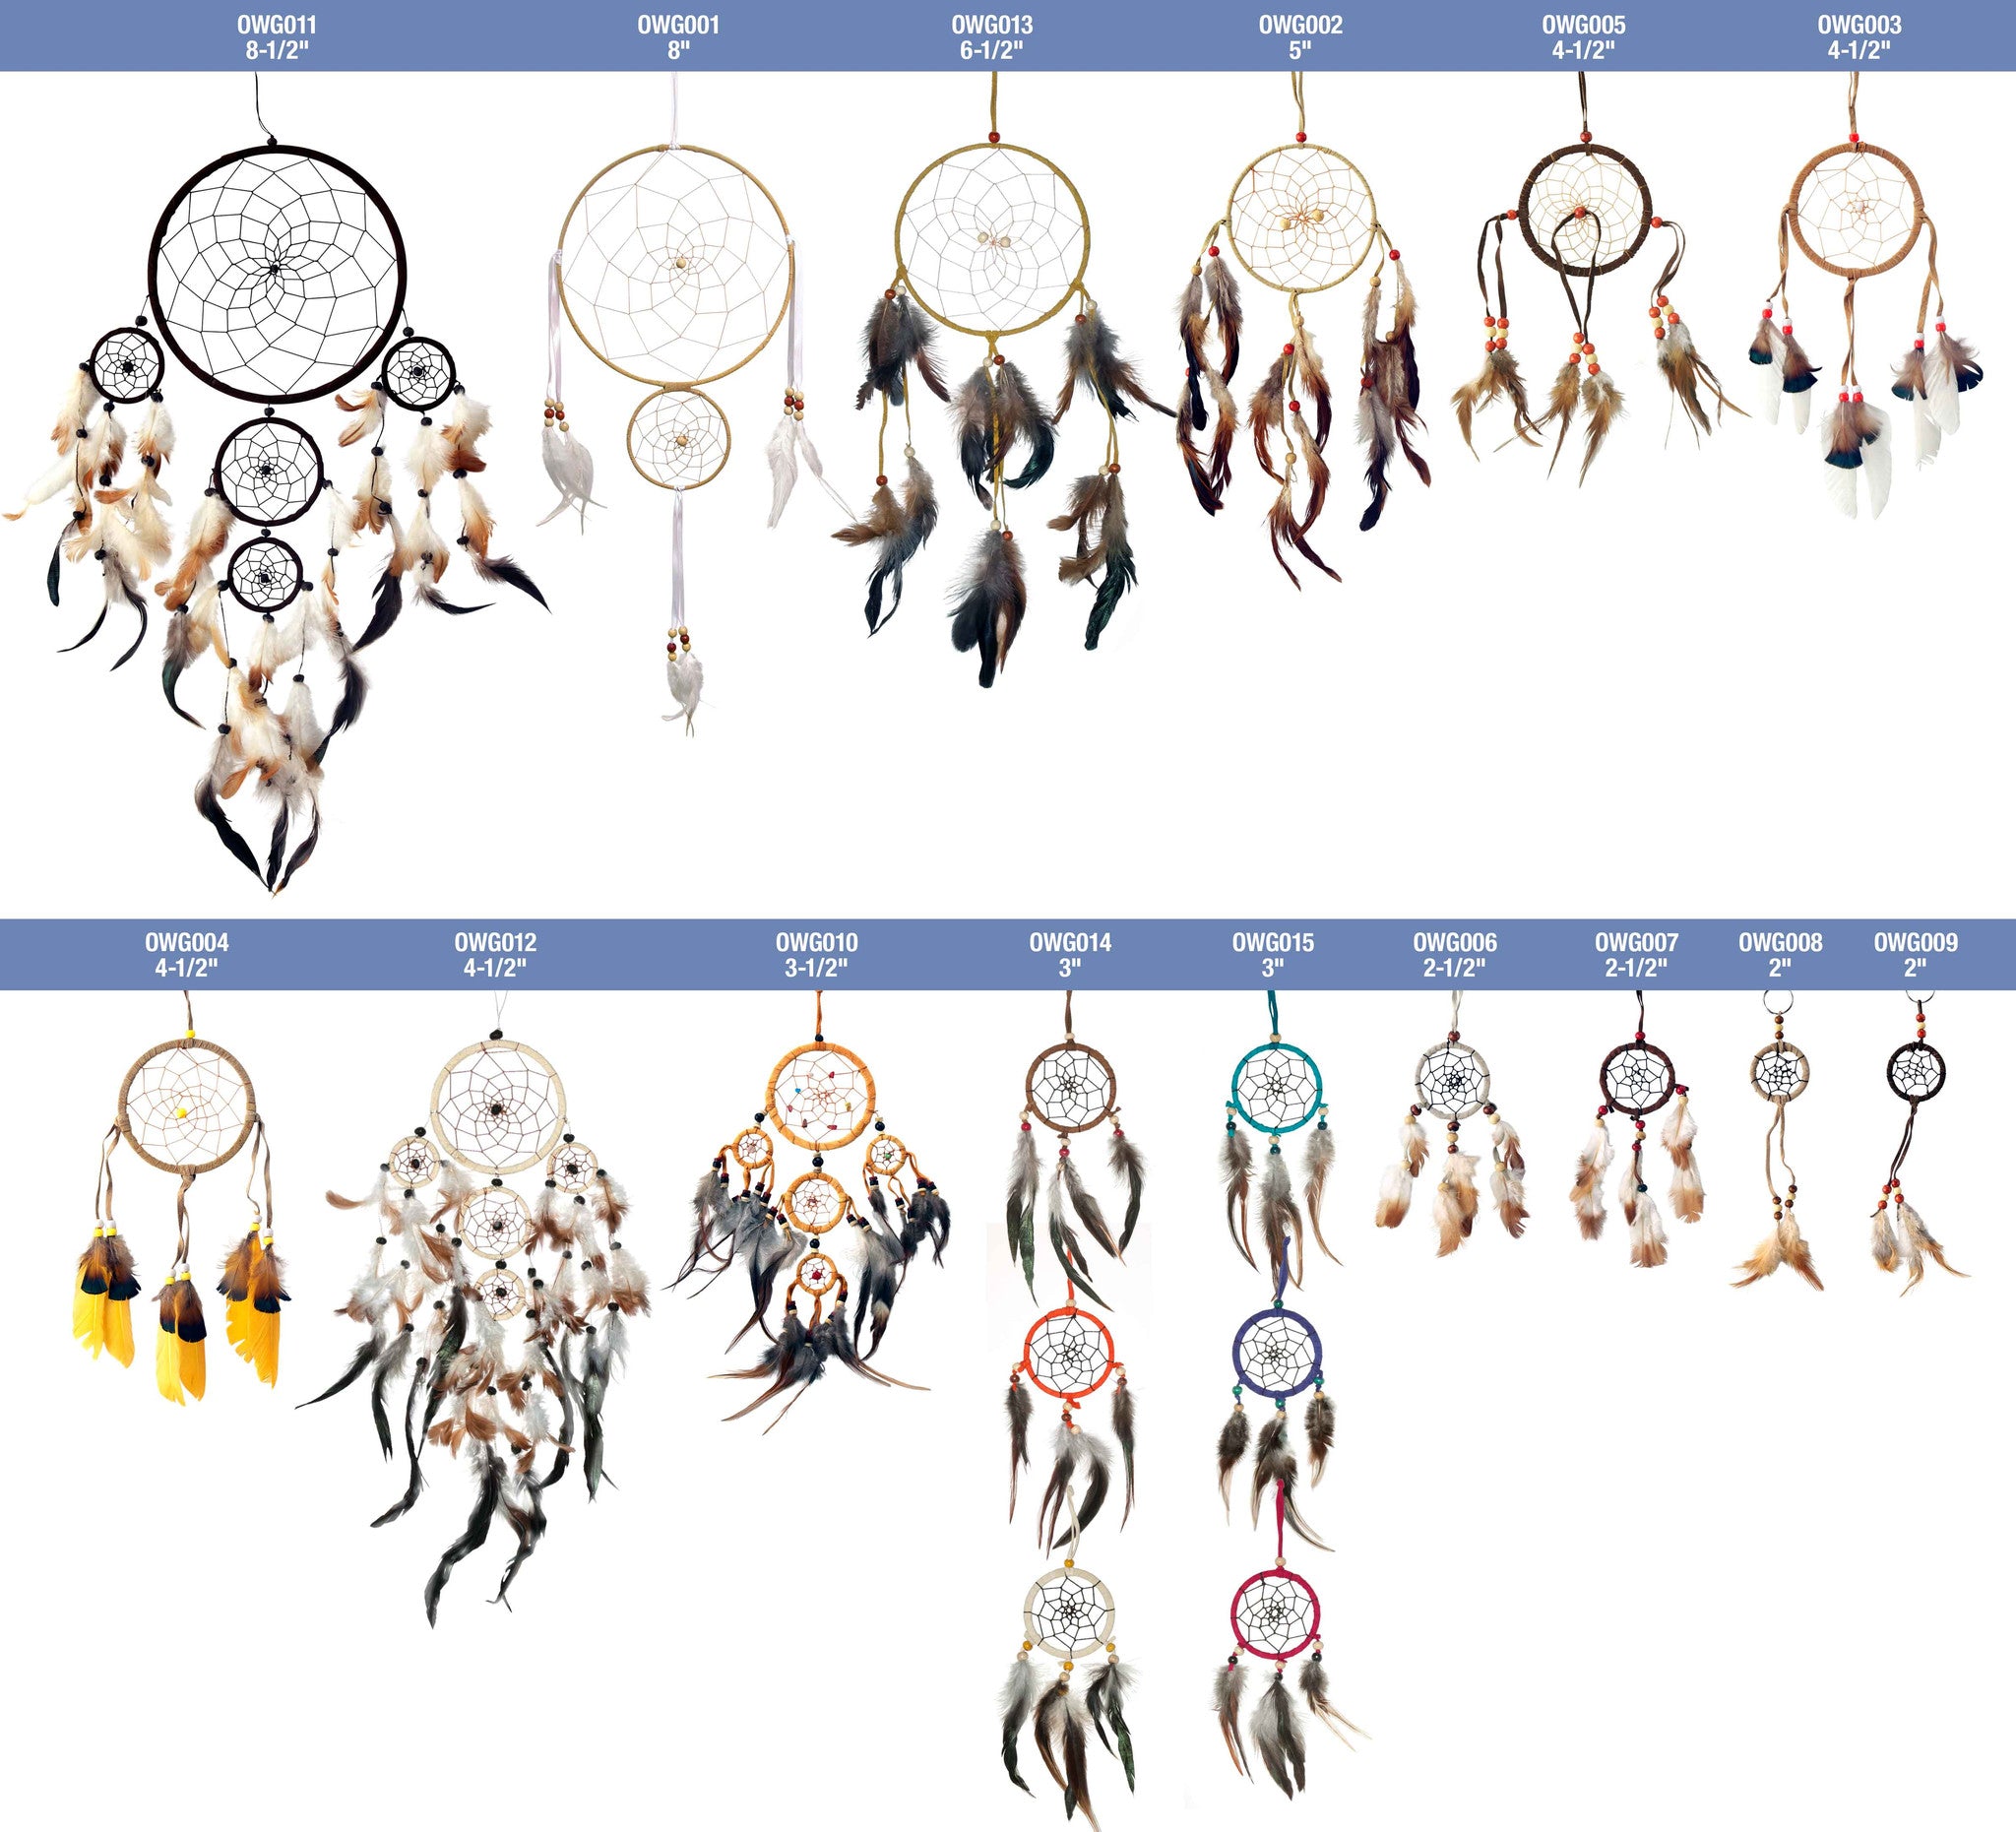 Size comparison chart showing many different dreamcatchers to scale